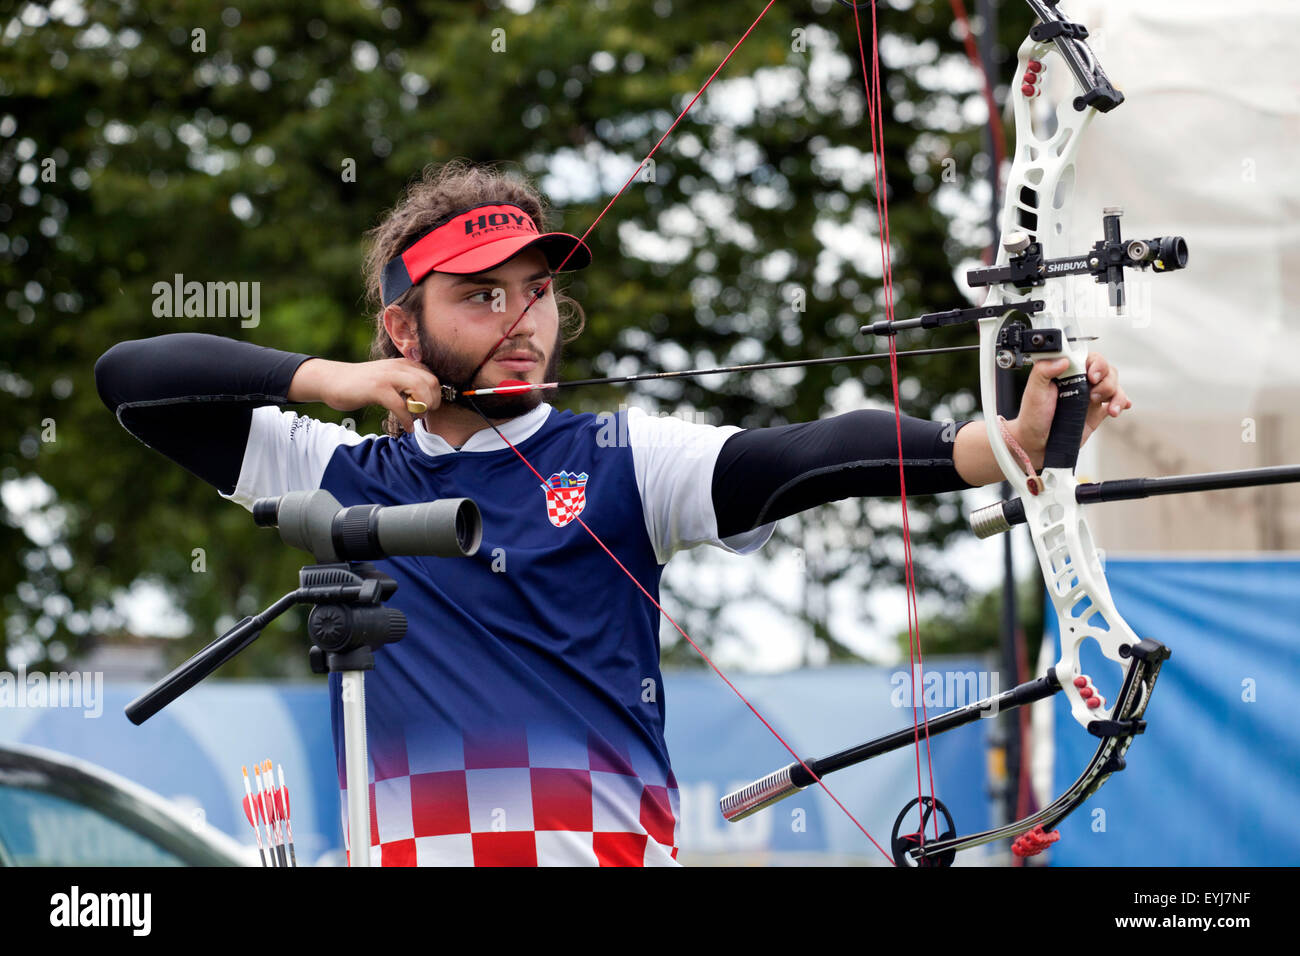 Copenhagen, Denmark, July 30th, 2015: Croatian archer Mario Vavro competes in the World Archery Championships in Copenhagen during Thursday's individual matches  in compound bow. Credit:  OJPHOTOS/Alamy Live News Stock Photo